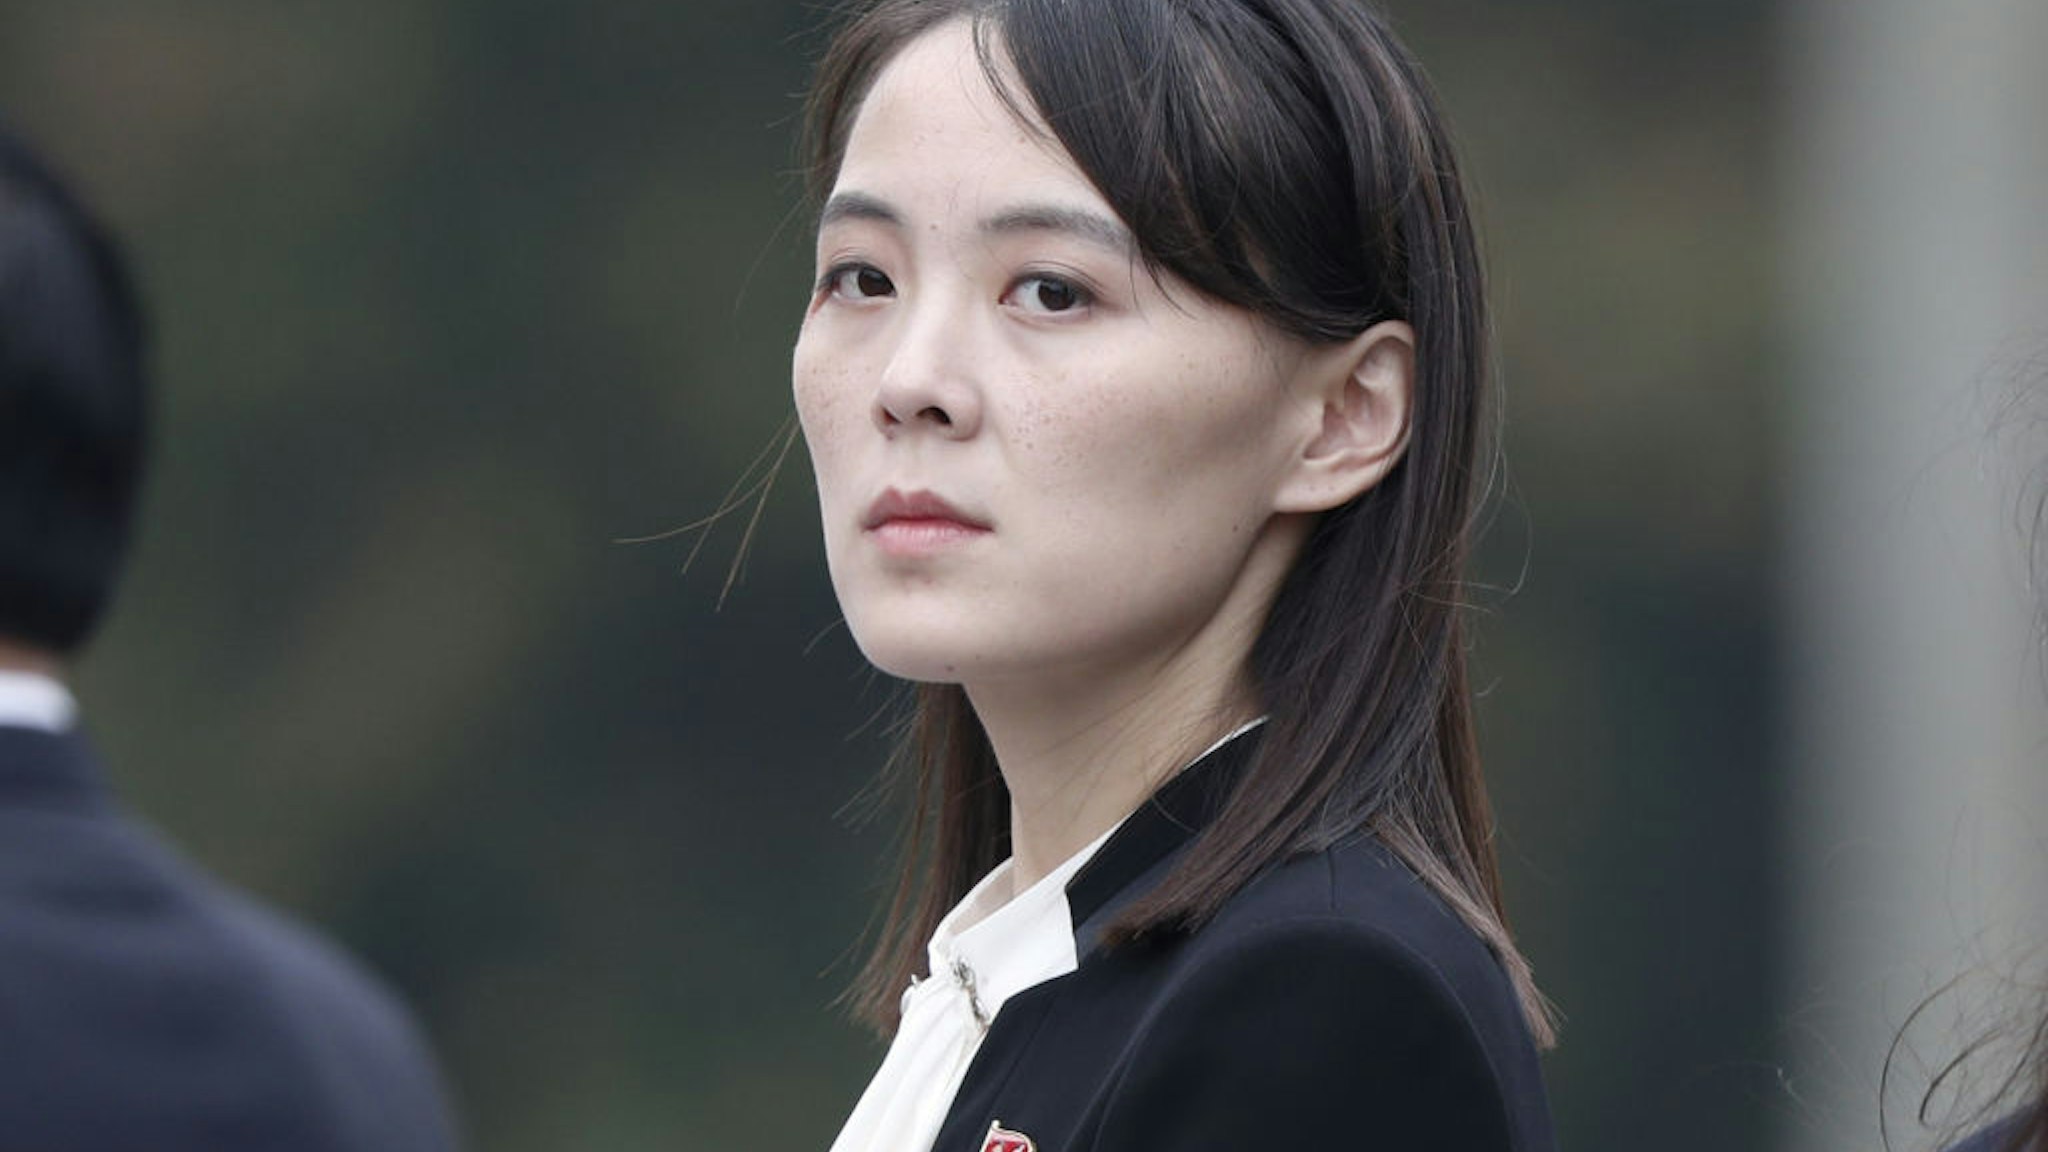 Kim Yo Jong, sister of North Korean leader Kim Jong Un, attends a wreath laying ceremony at the Ho Chi Minh Mausoleum in Hanoi, Vietnam, on Saturday, March 2, 2019.